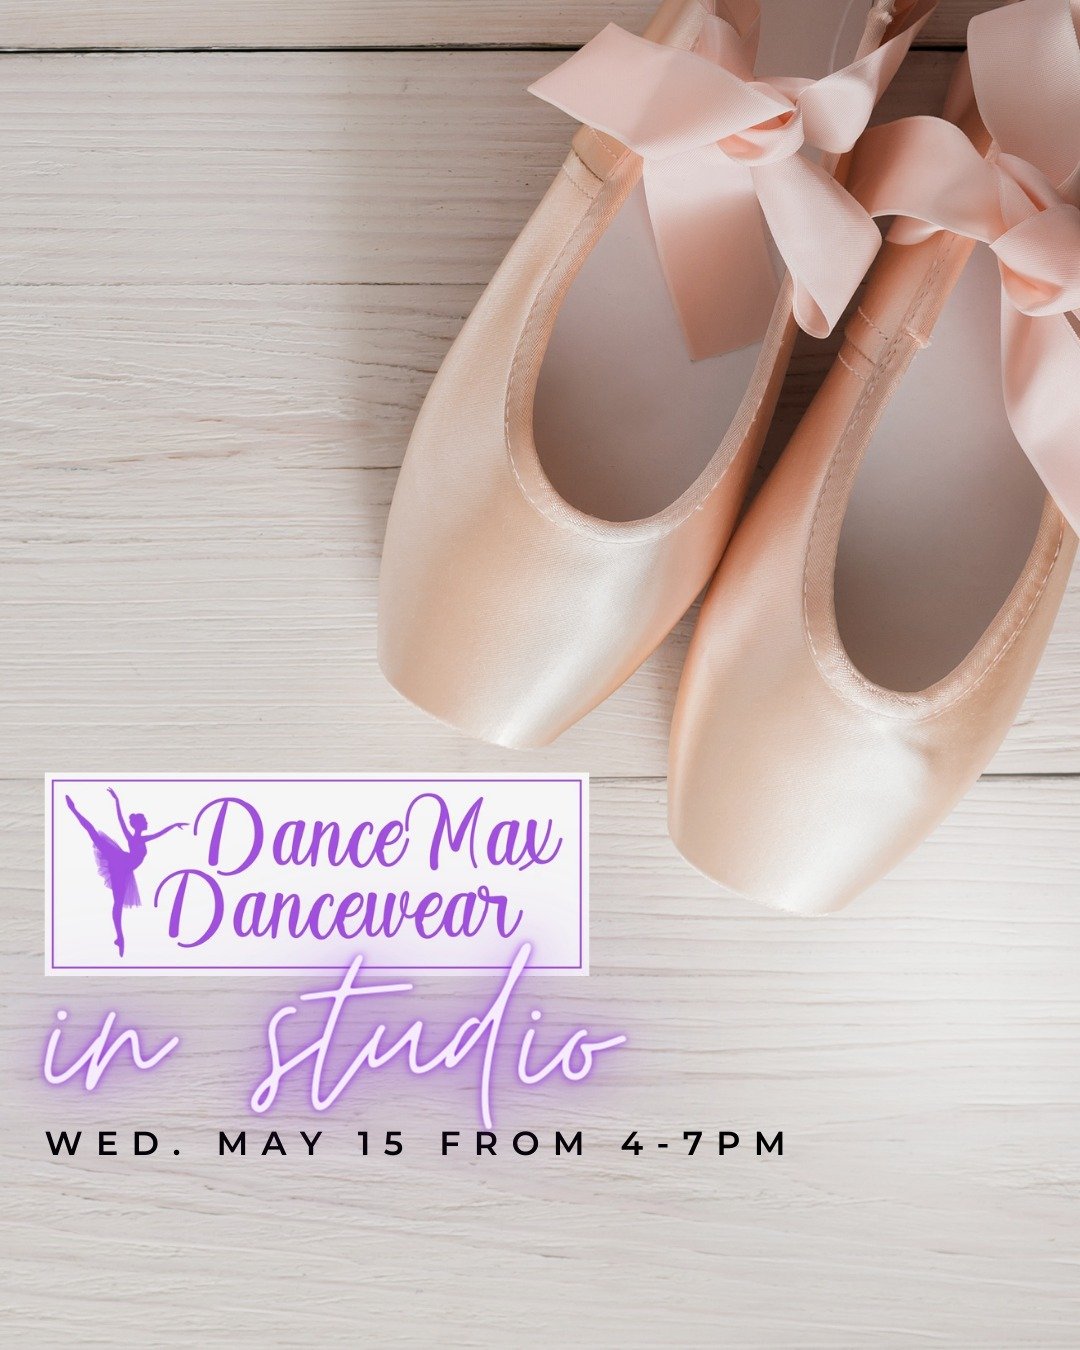 DanceMax Dancewear will be at the studio with tights and recital needs for sale if you need a new or extra pair for recital! List of tights and shoe requirements for recital can be found here: https://www.dancetechandtalent.com/recital